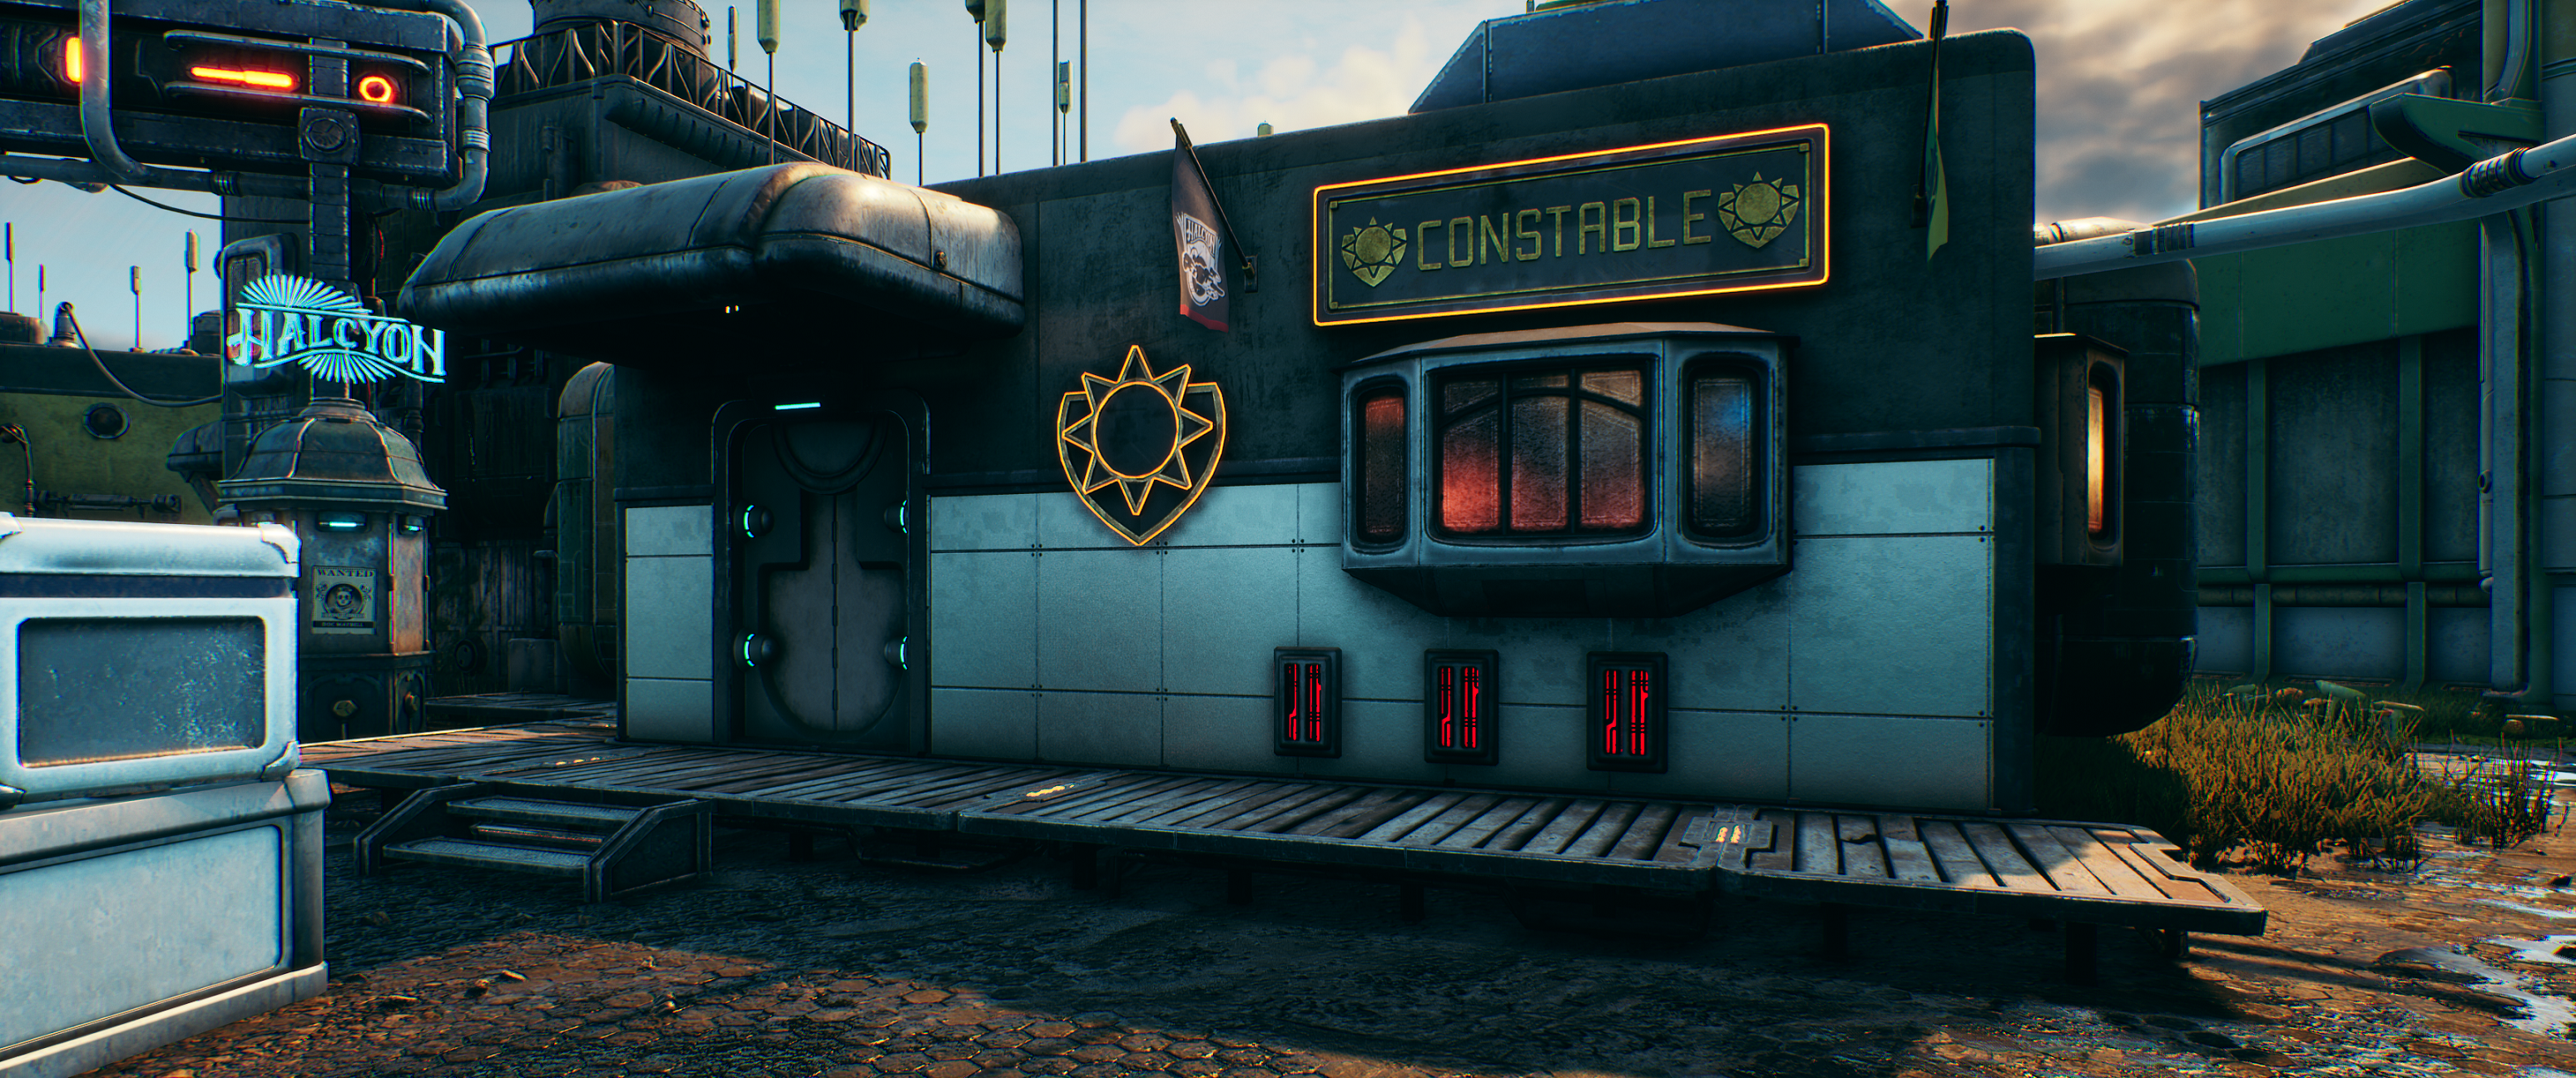 Constabulary, The Outer Worlds Wiki